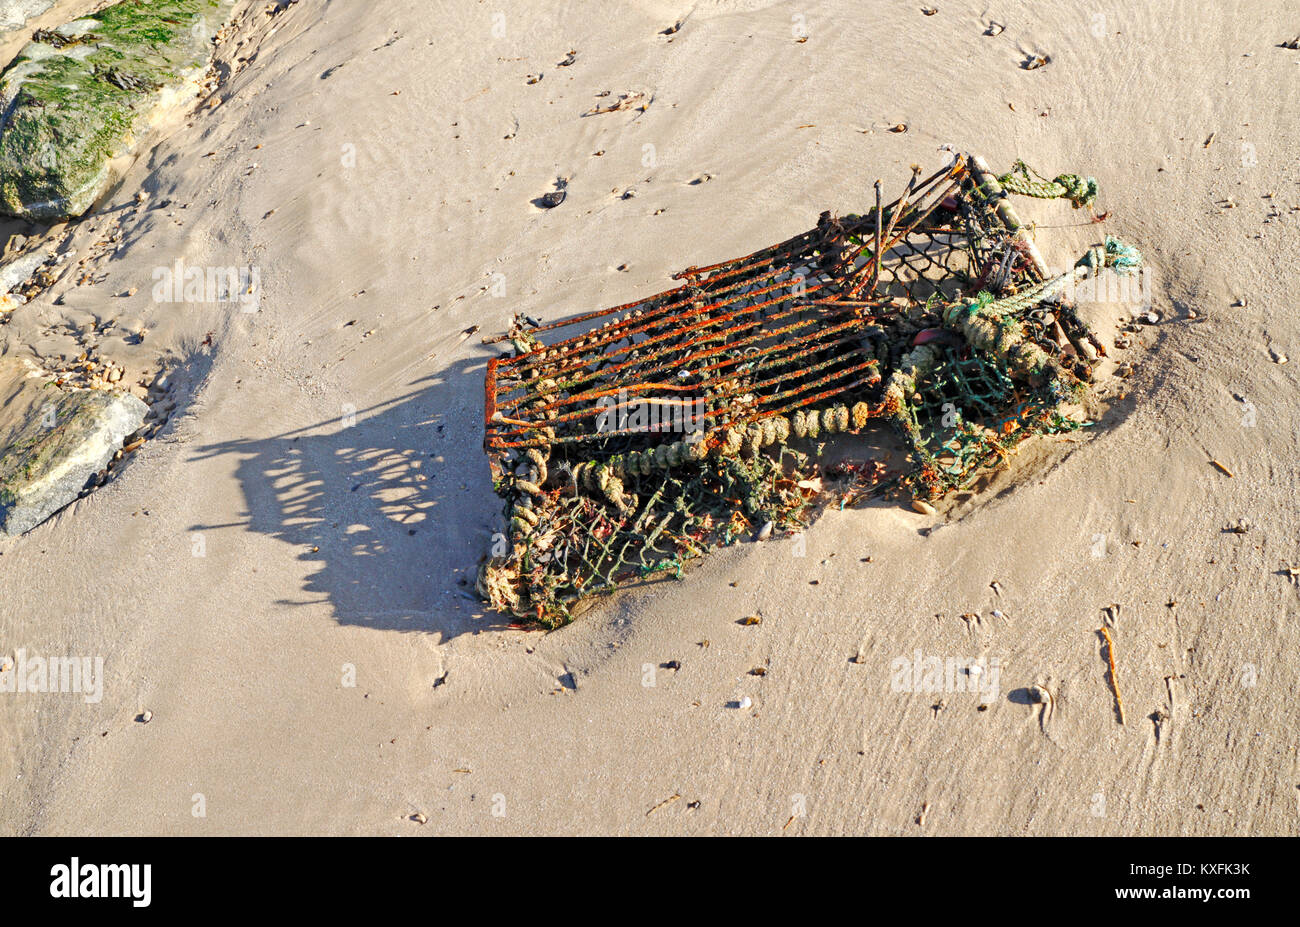 An old crab pot washed up on a beach in Norfolk, England, United Kingdom. Stock Photo